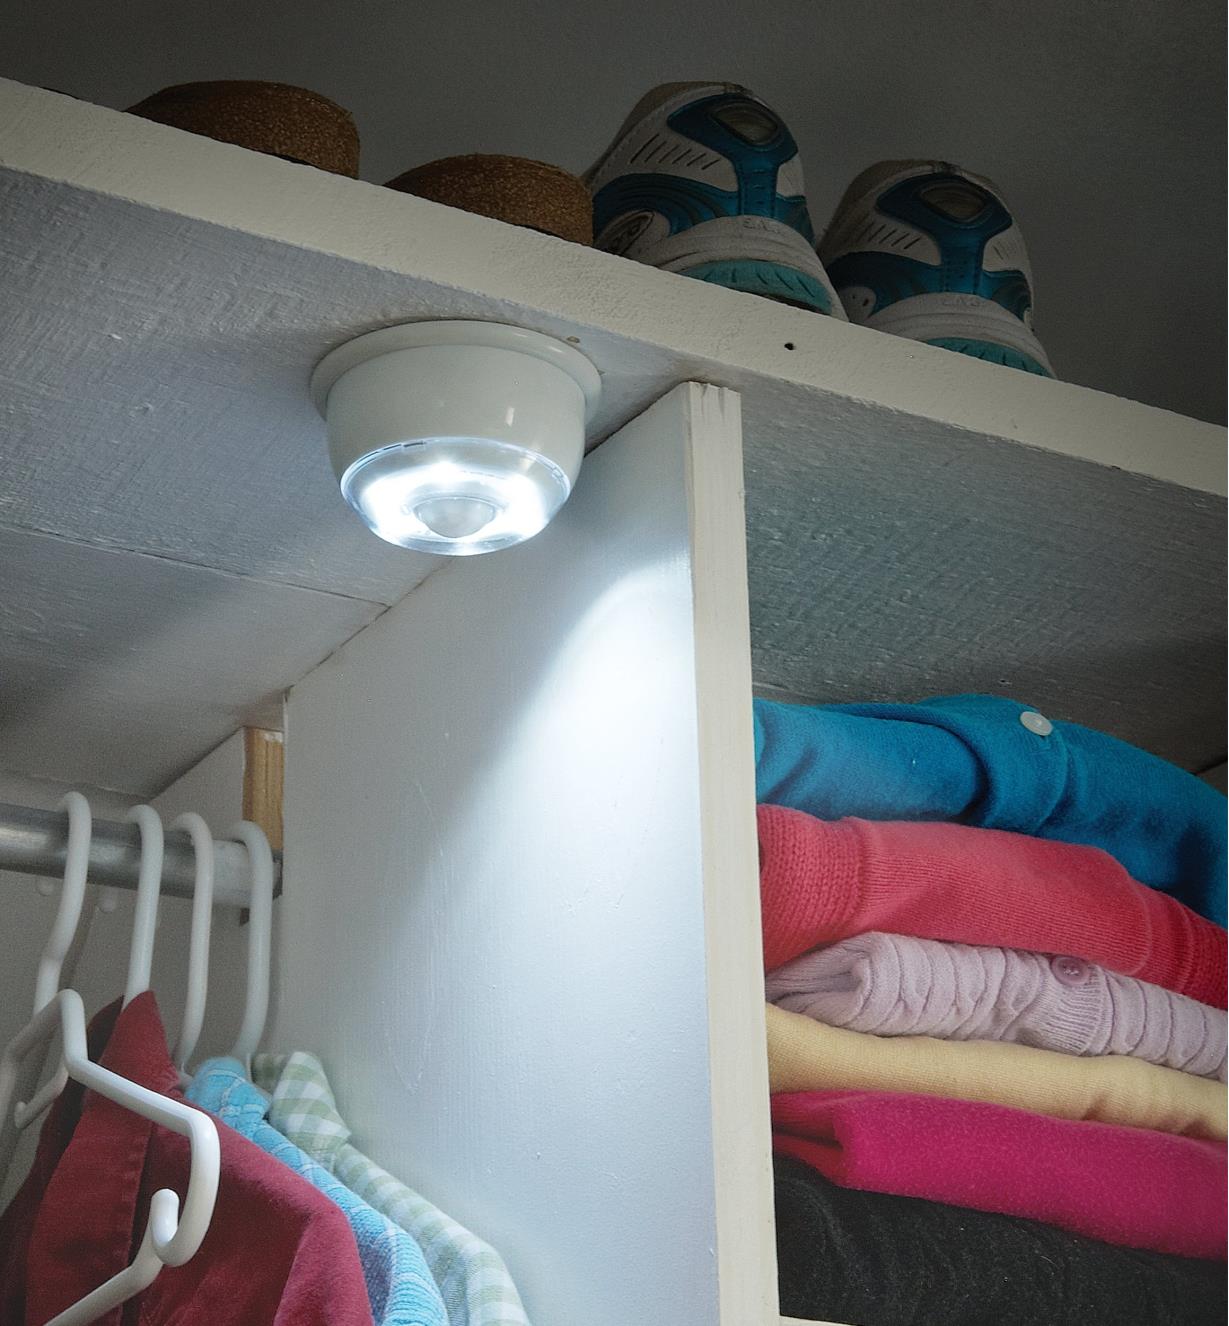 LED Infrared Detection Light mounted in a closet